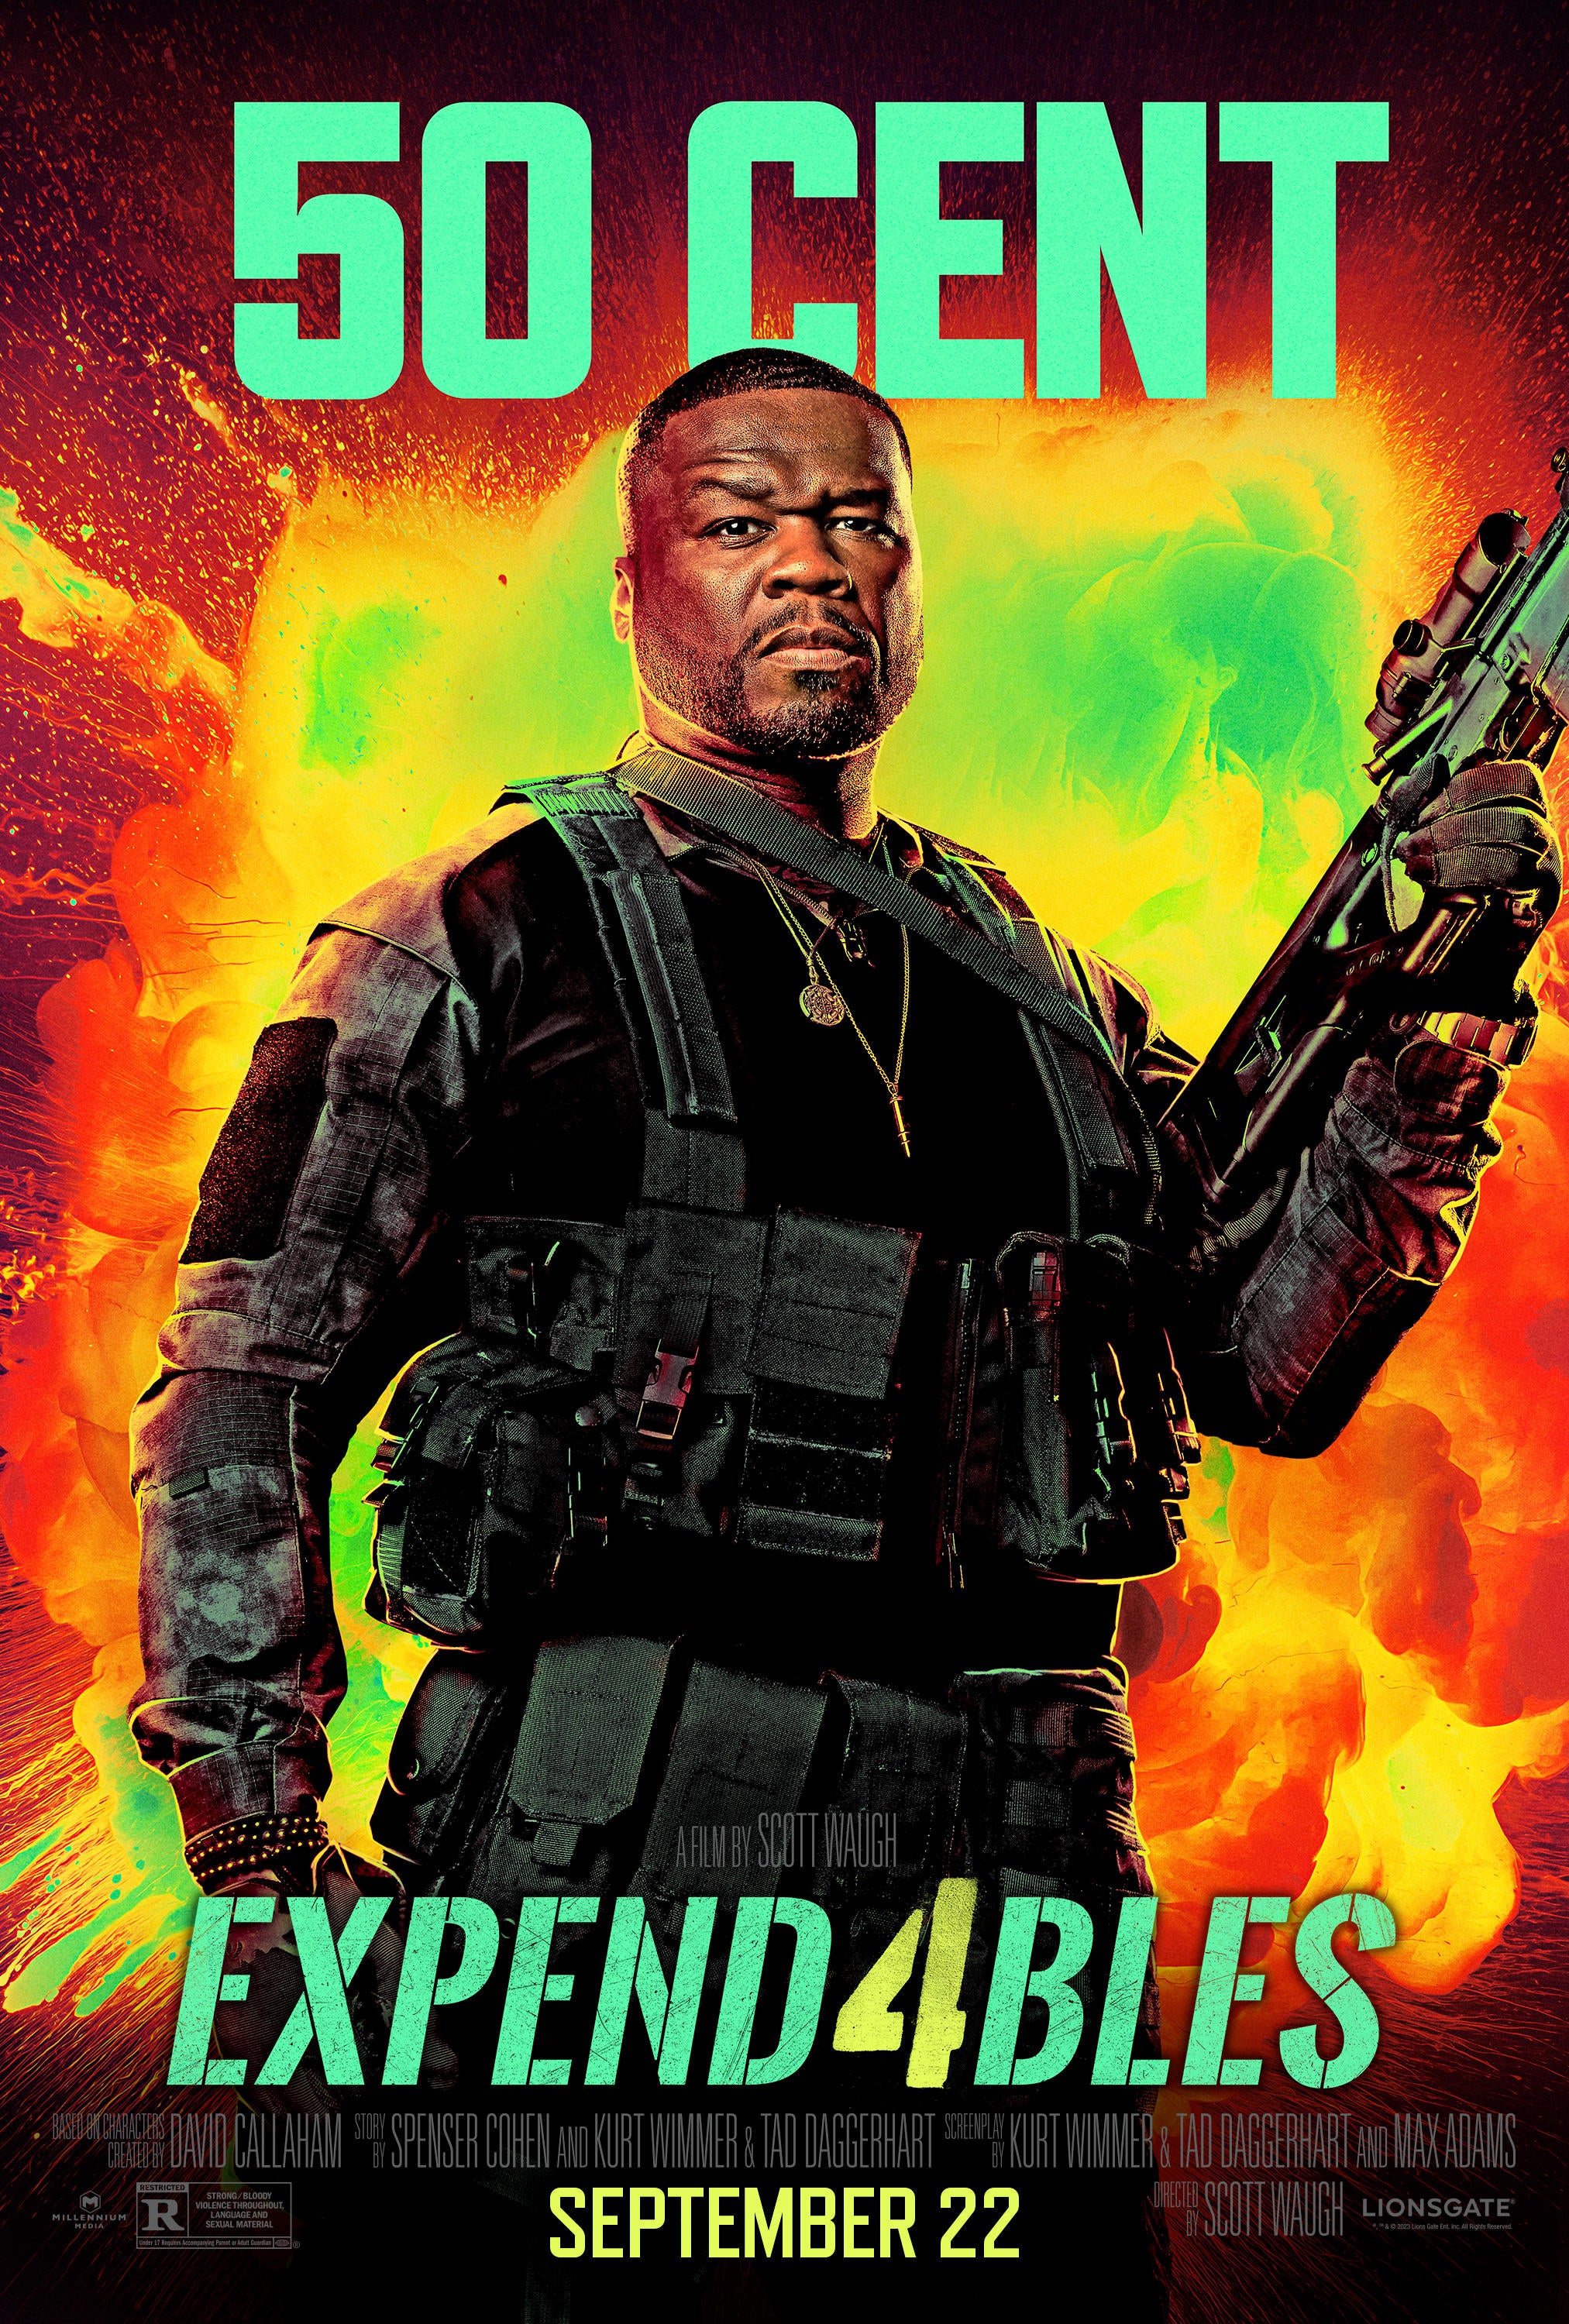 expendables-4-poster-50-cent.jpg